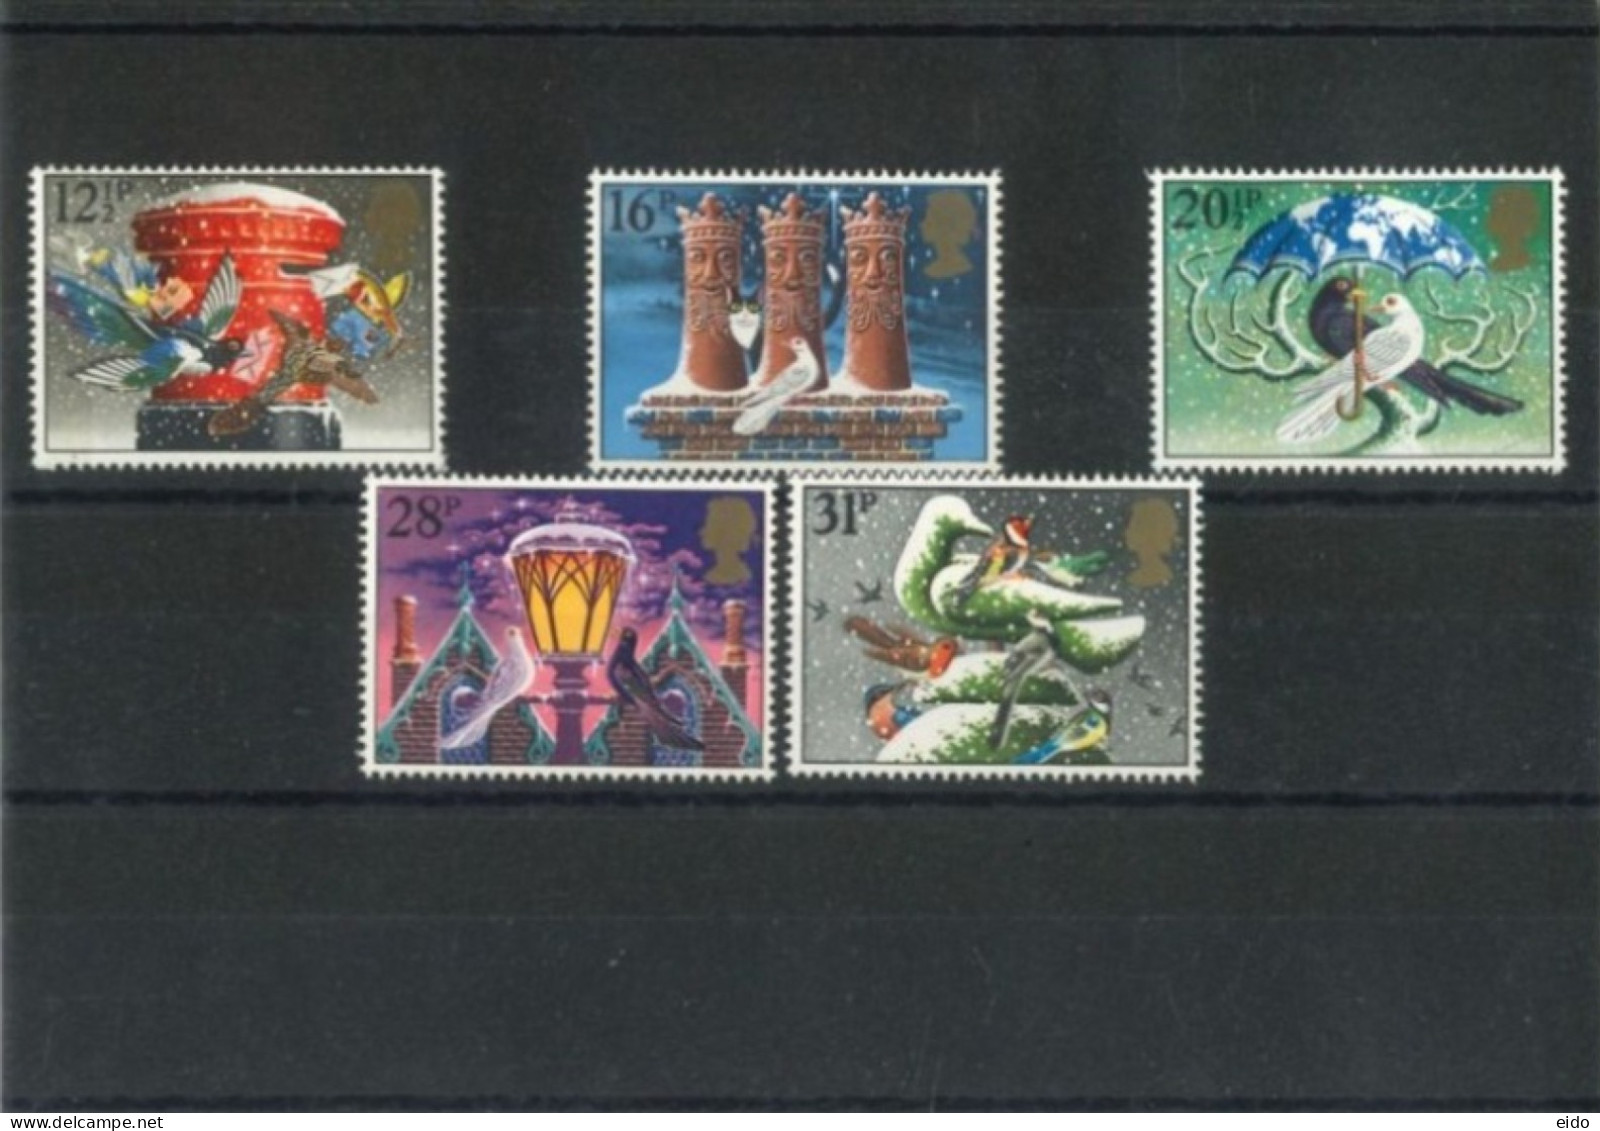 GREAT BRITAIN - 1983 - CHRISTMAS STAMPS COMPLETE SET OF 5, SG # 1231/35, UMM(**). - Universal Mail Stamps